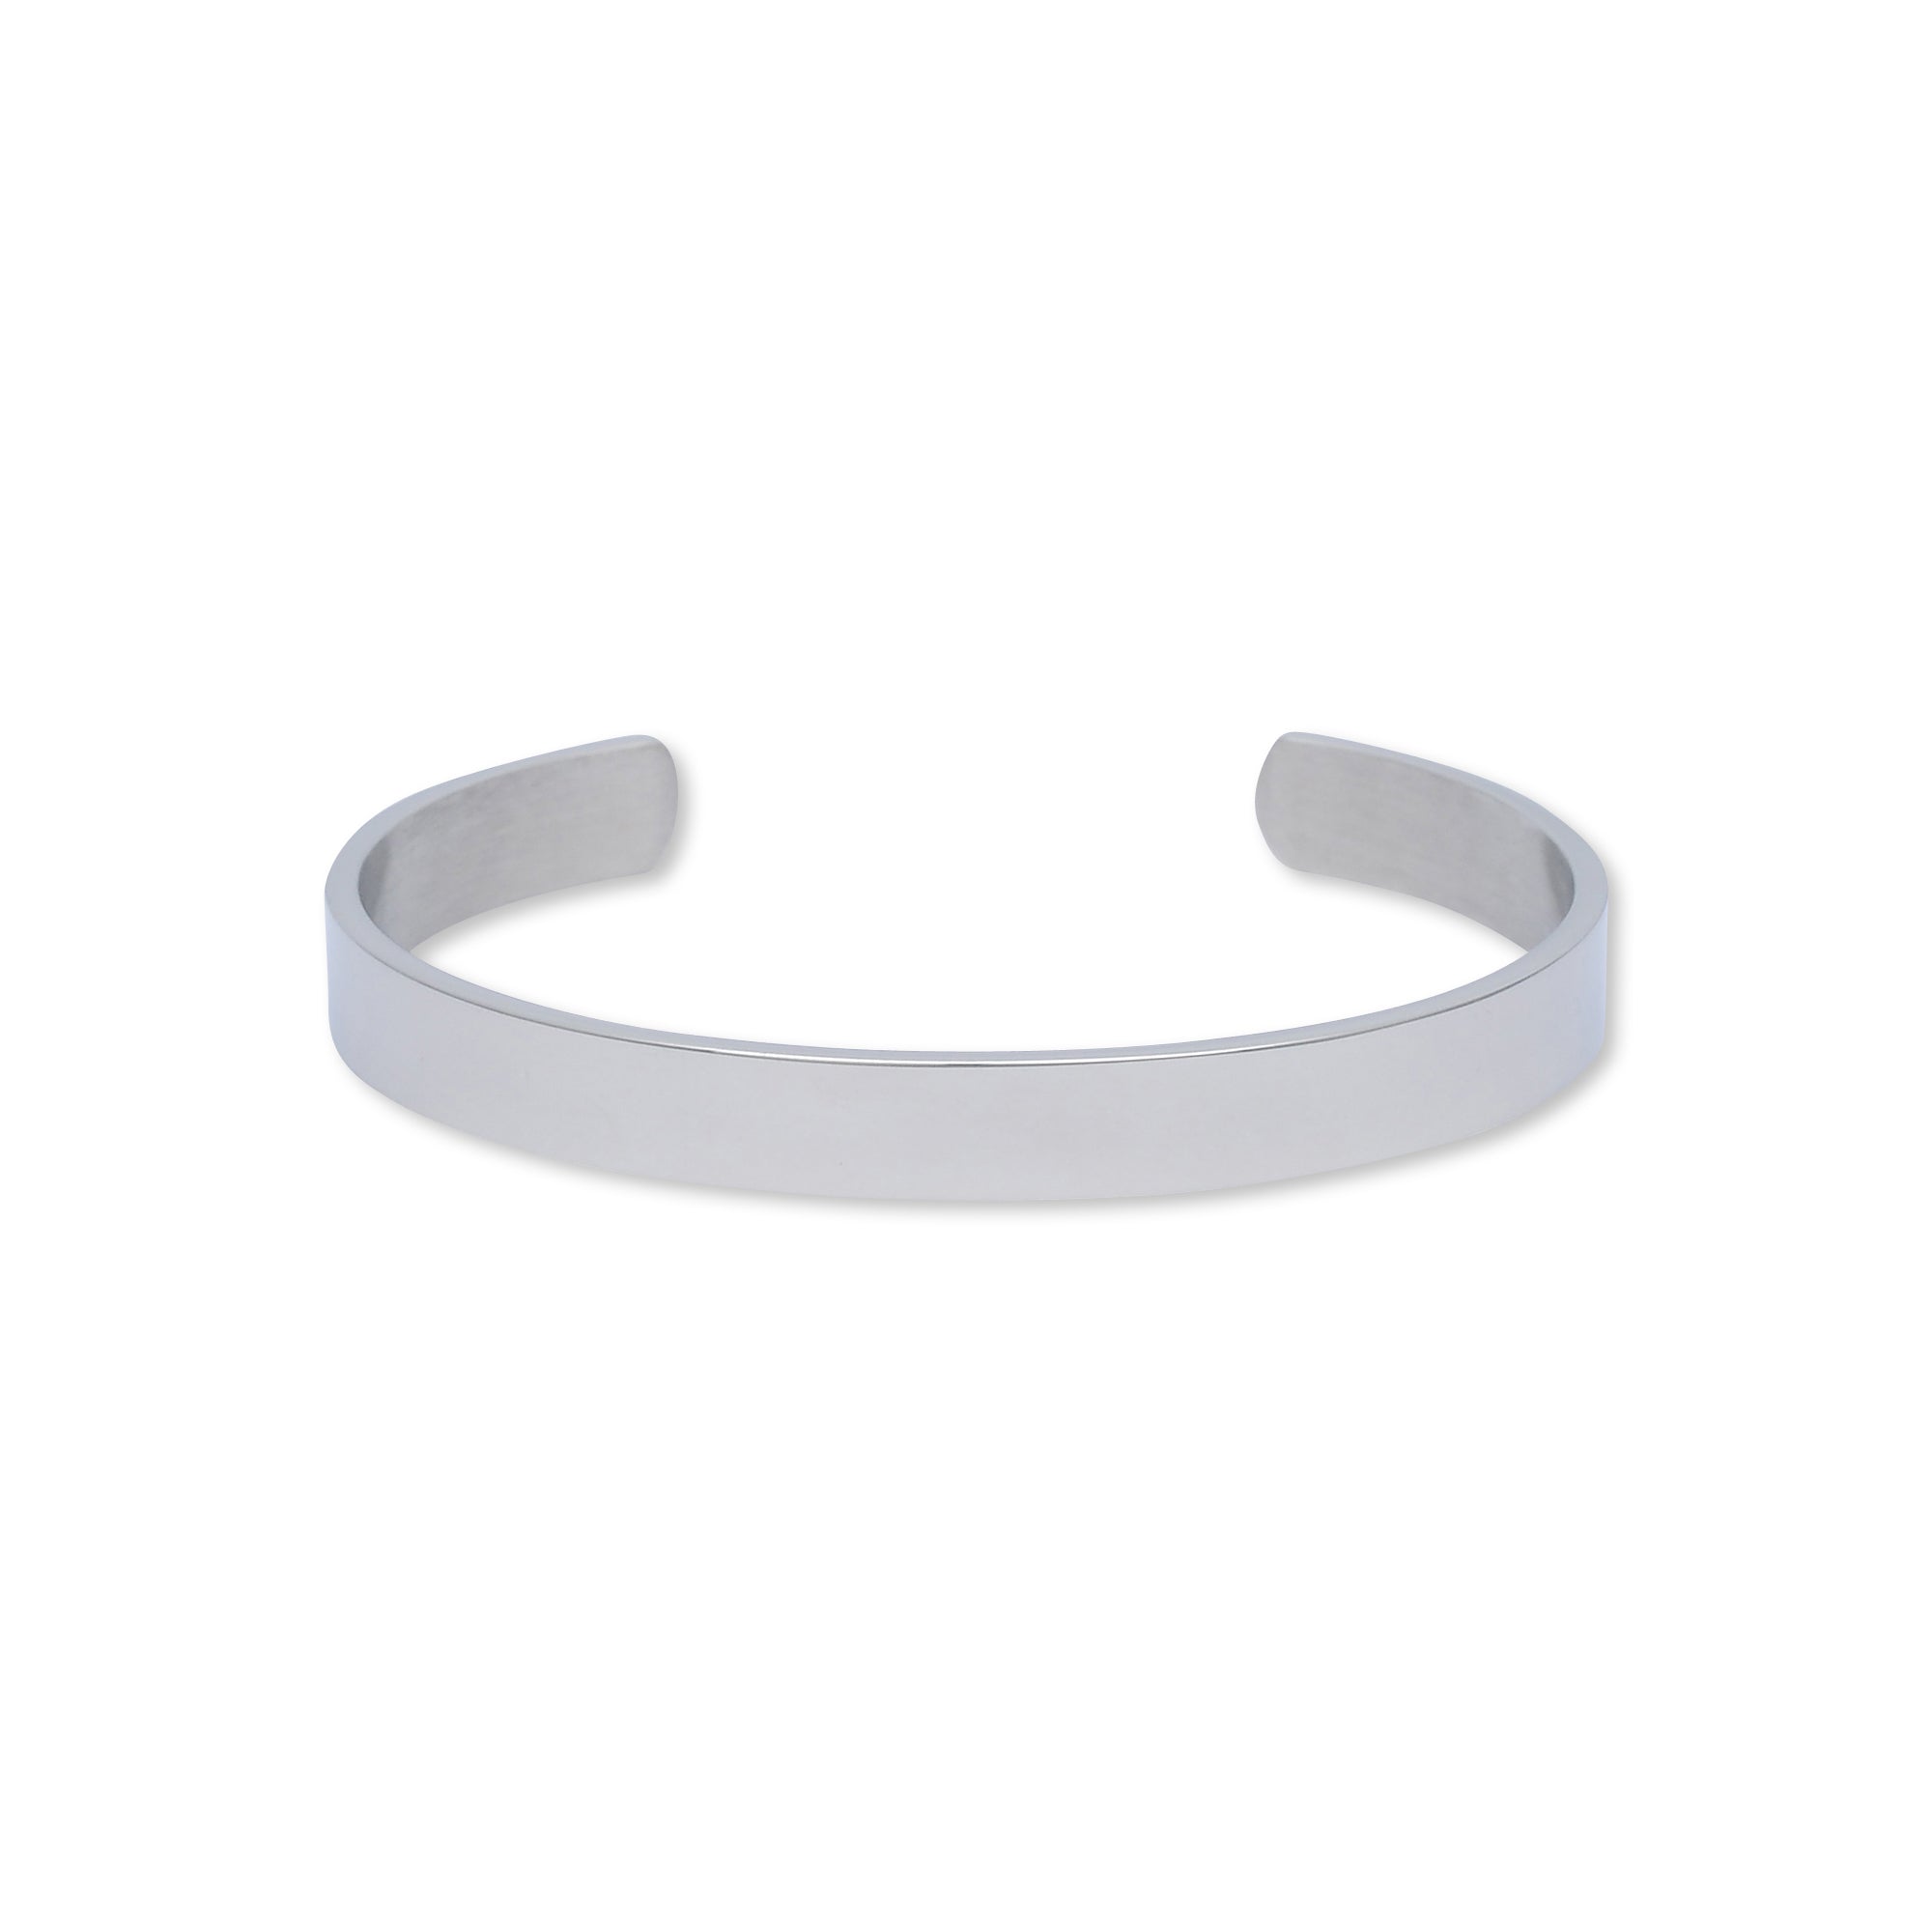 Silver Stainless Steel Cuff Bangle